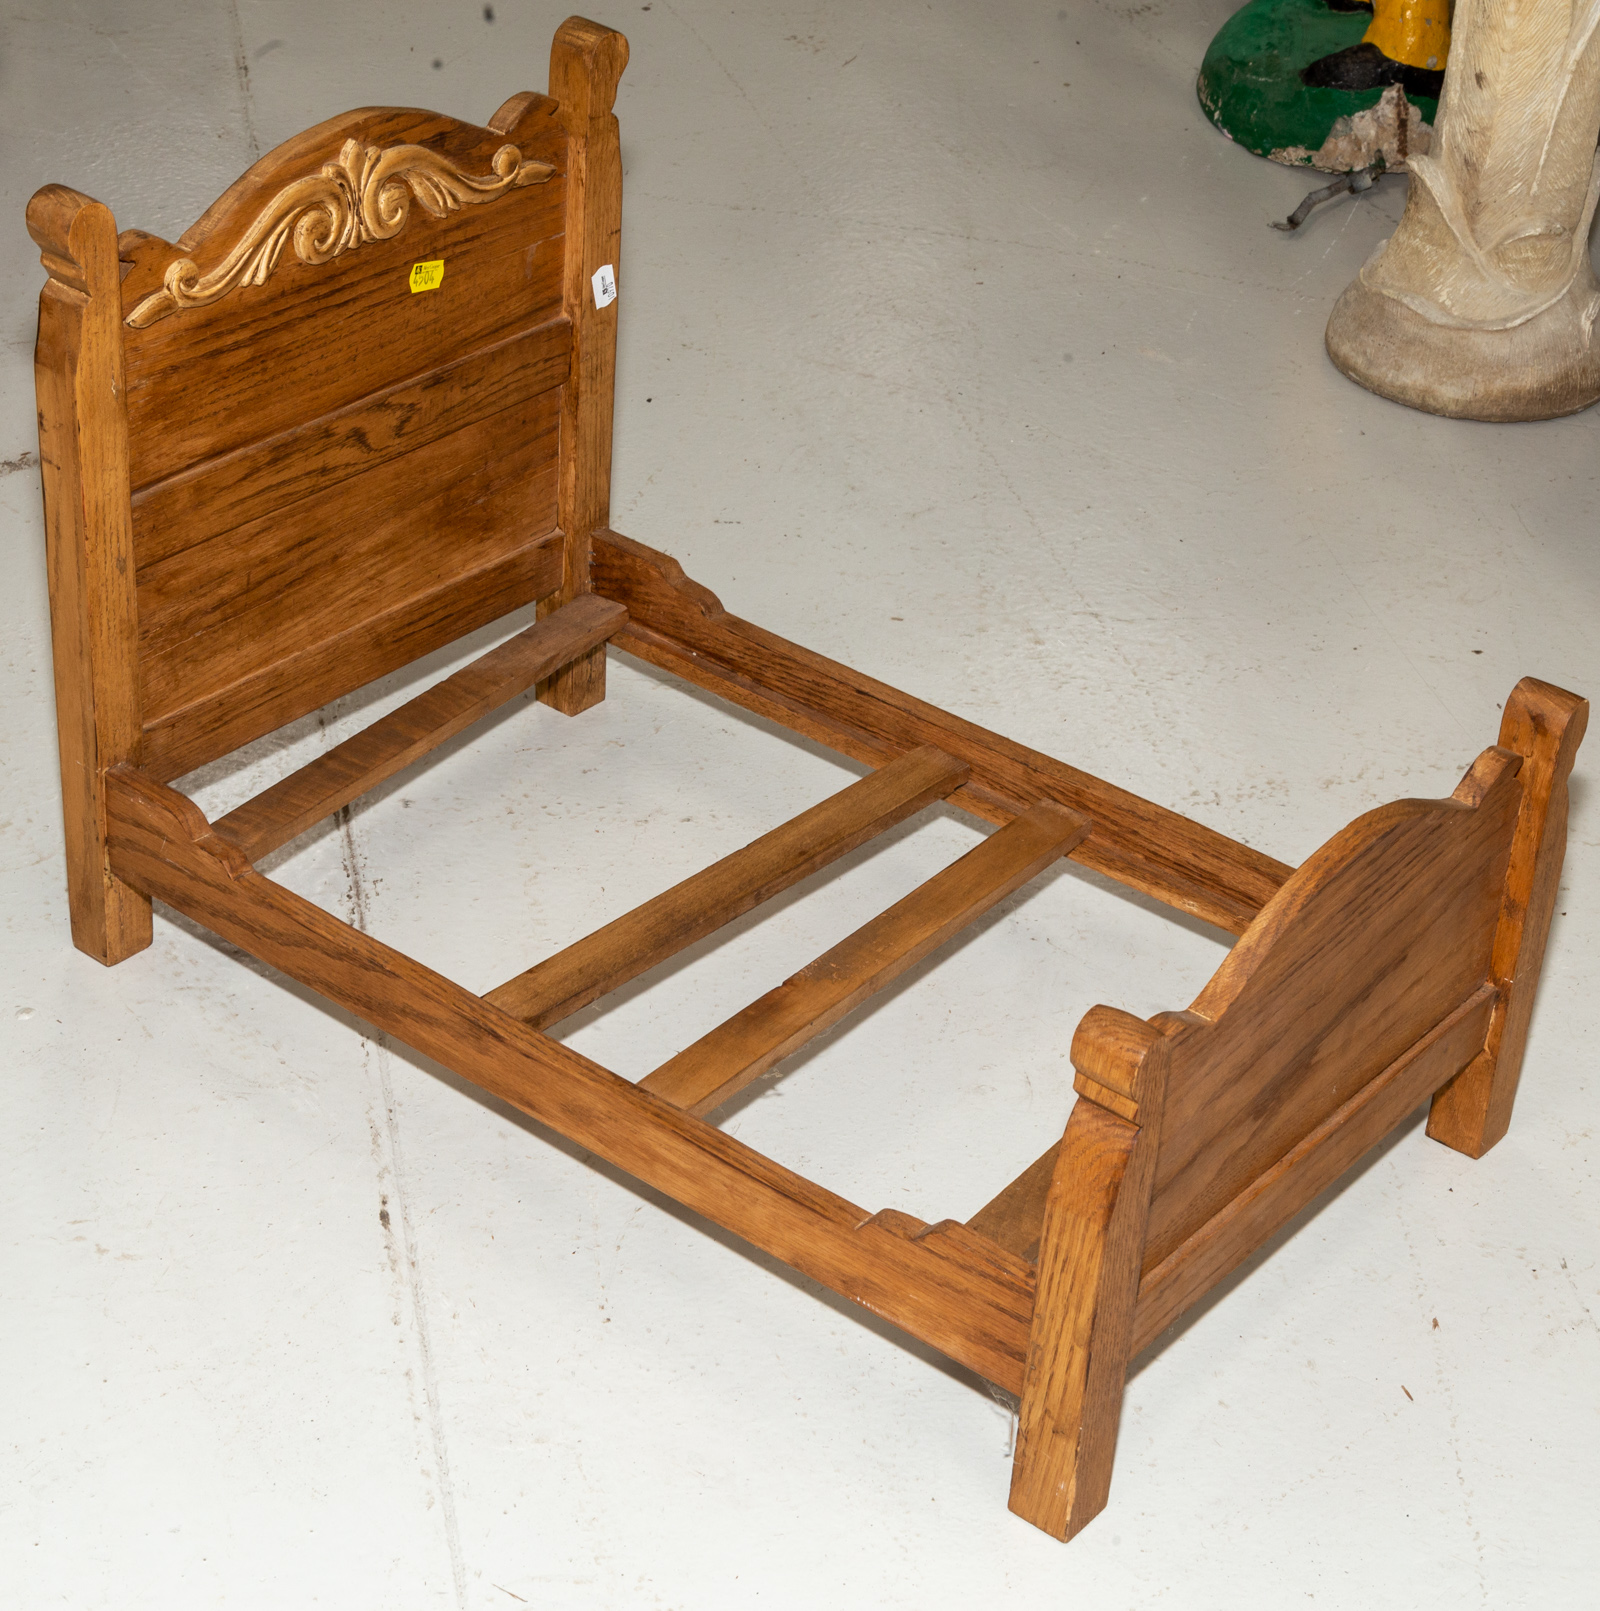 VICTORIAN STYLE OAK DOLL S BED 338c29